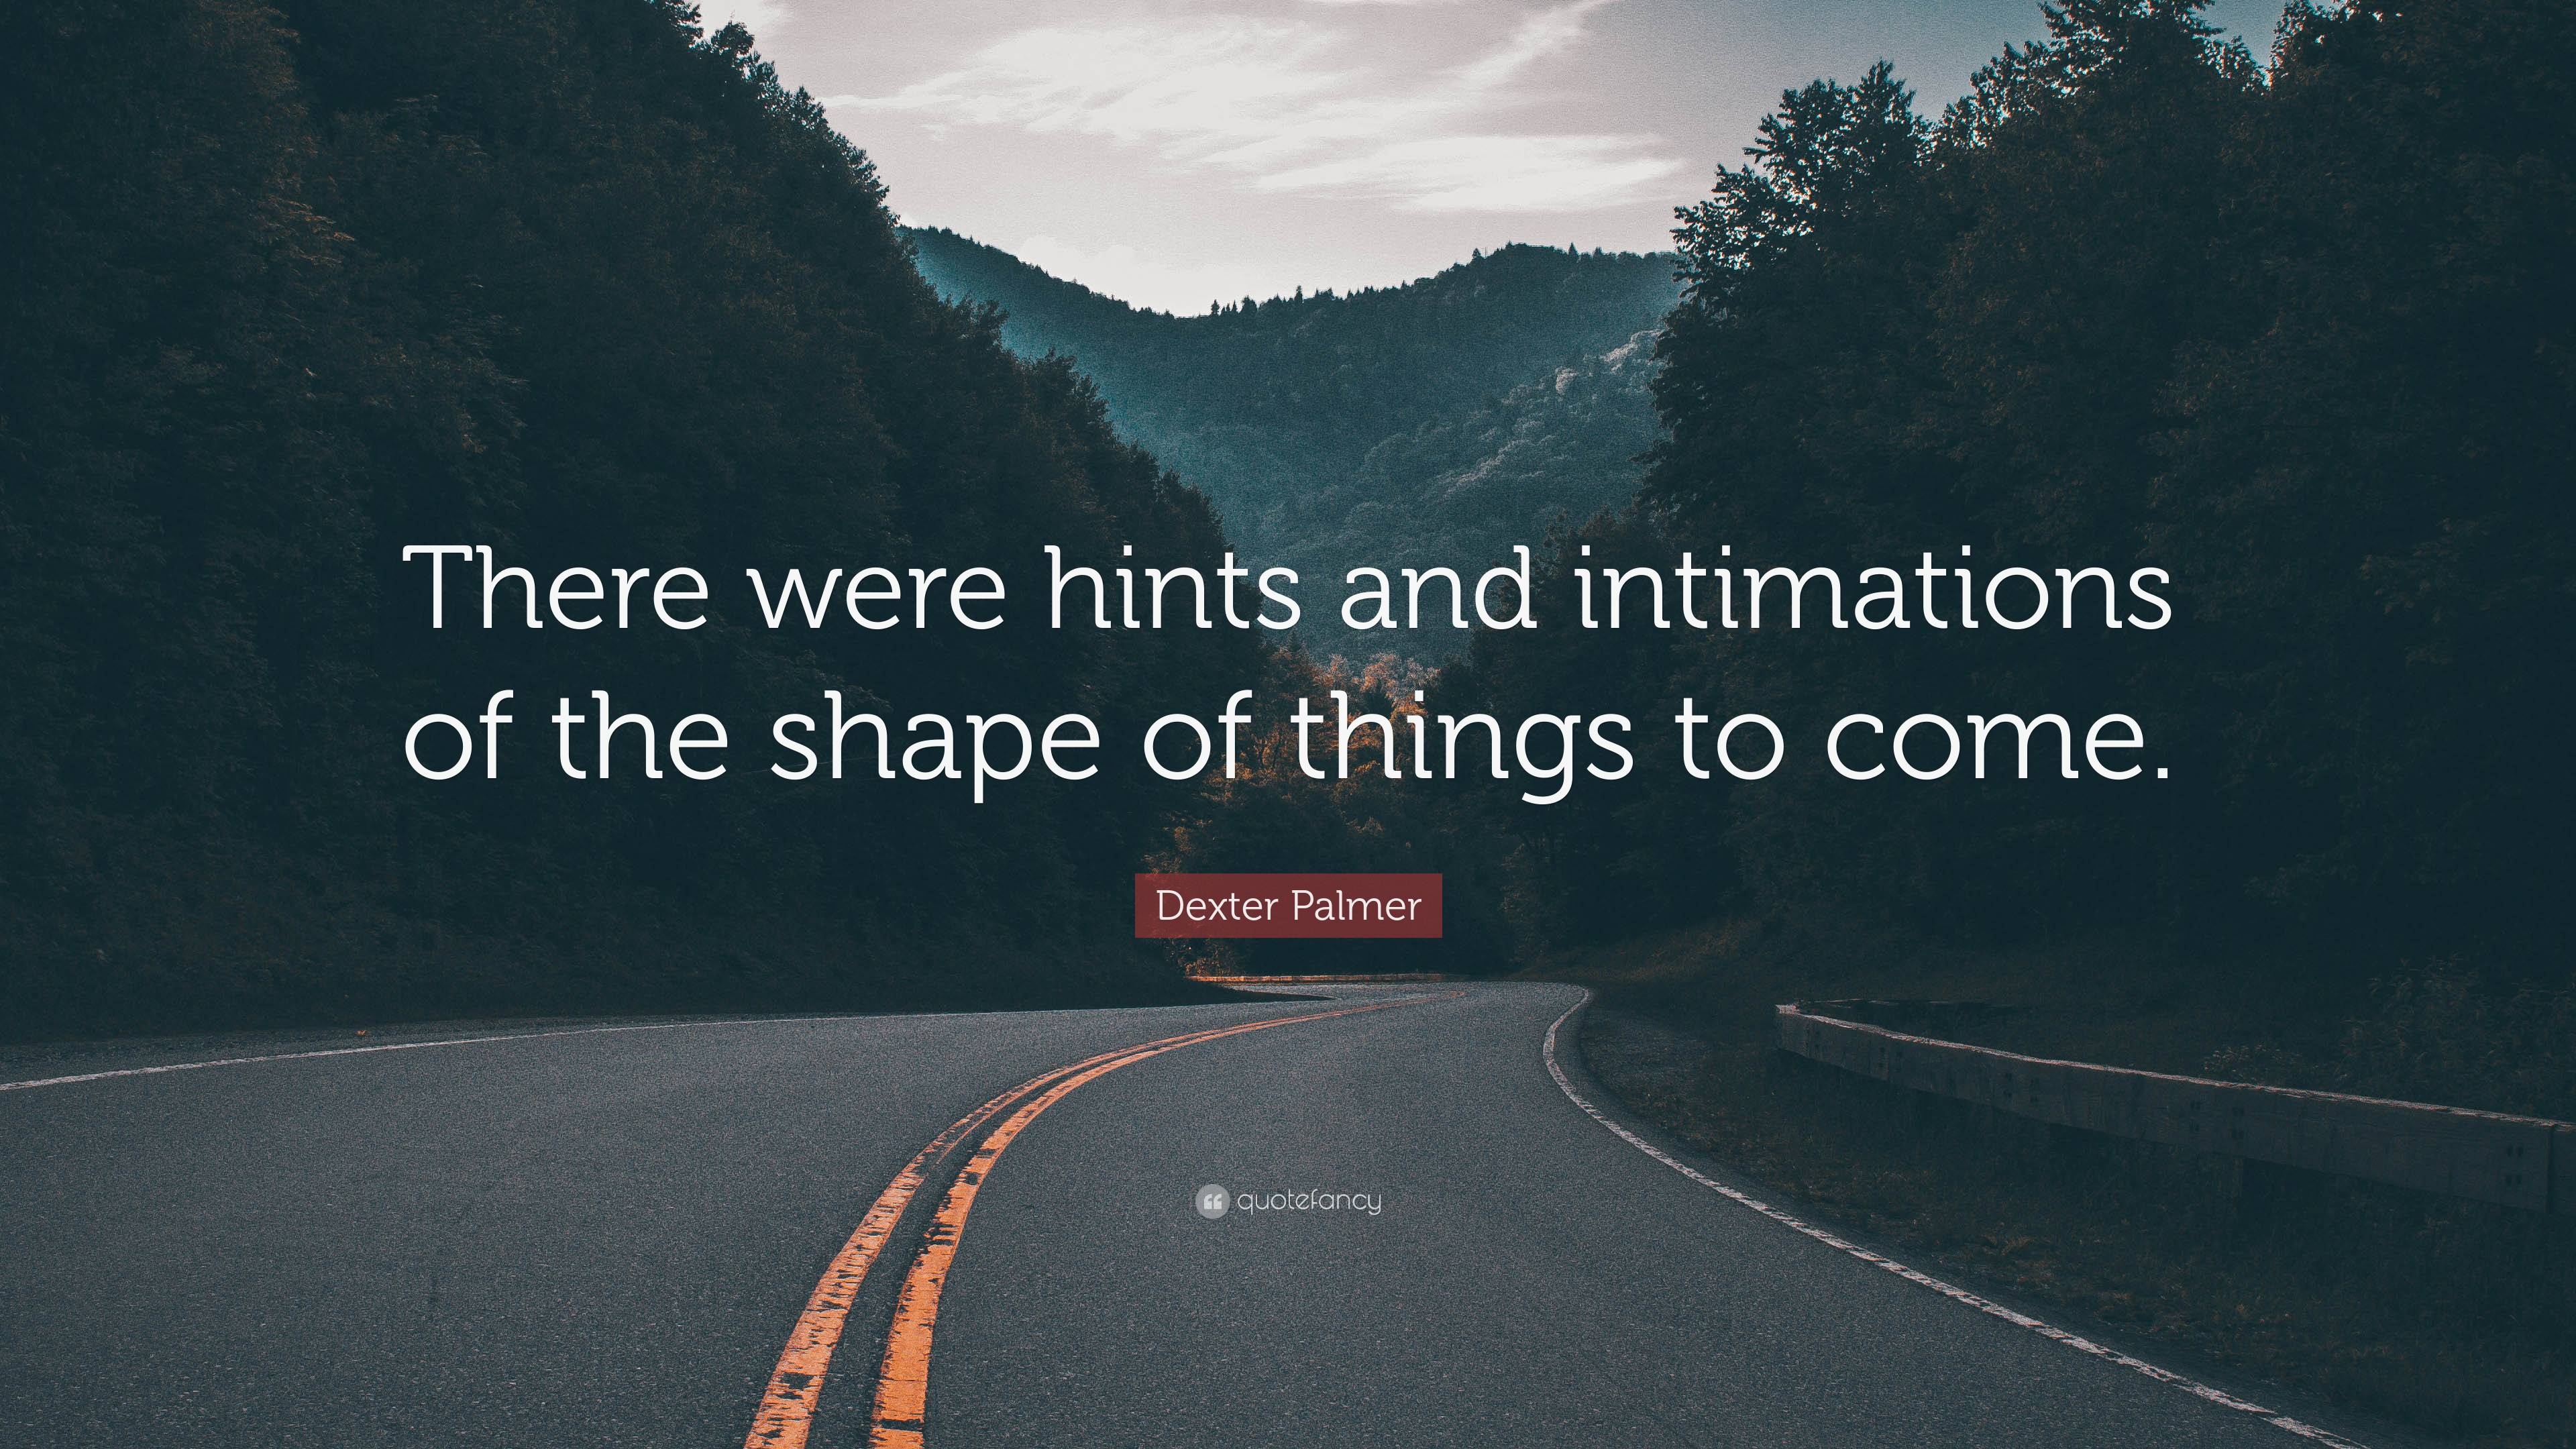 Dexter Palmer Quote: “There were hints and intimations of the shape of  things to come.”